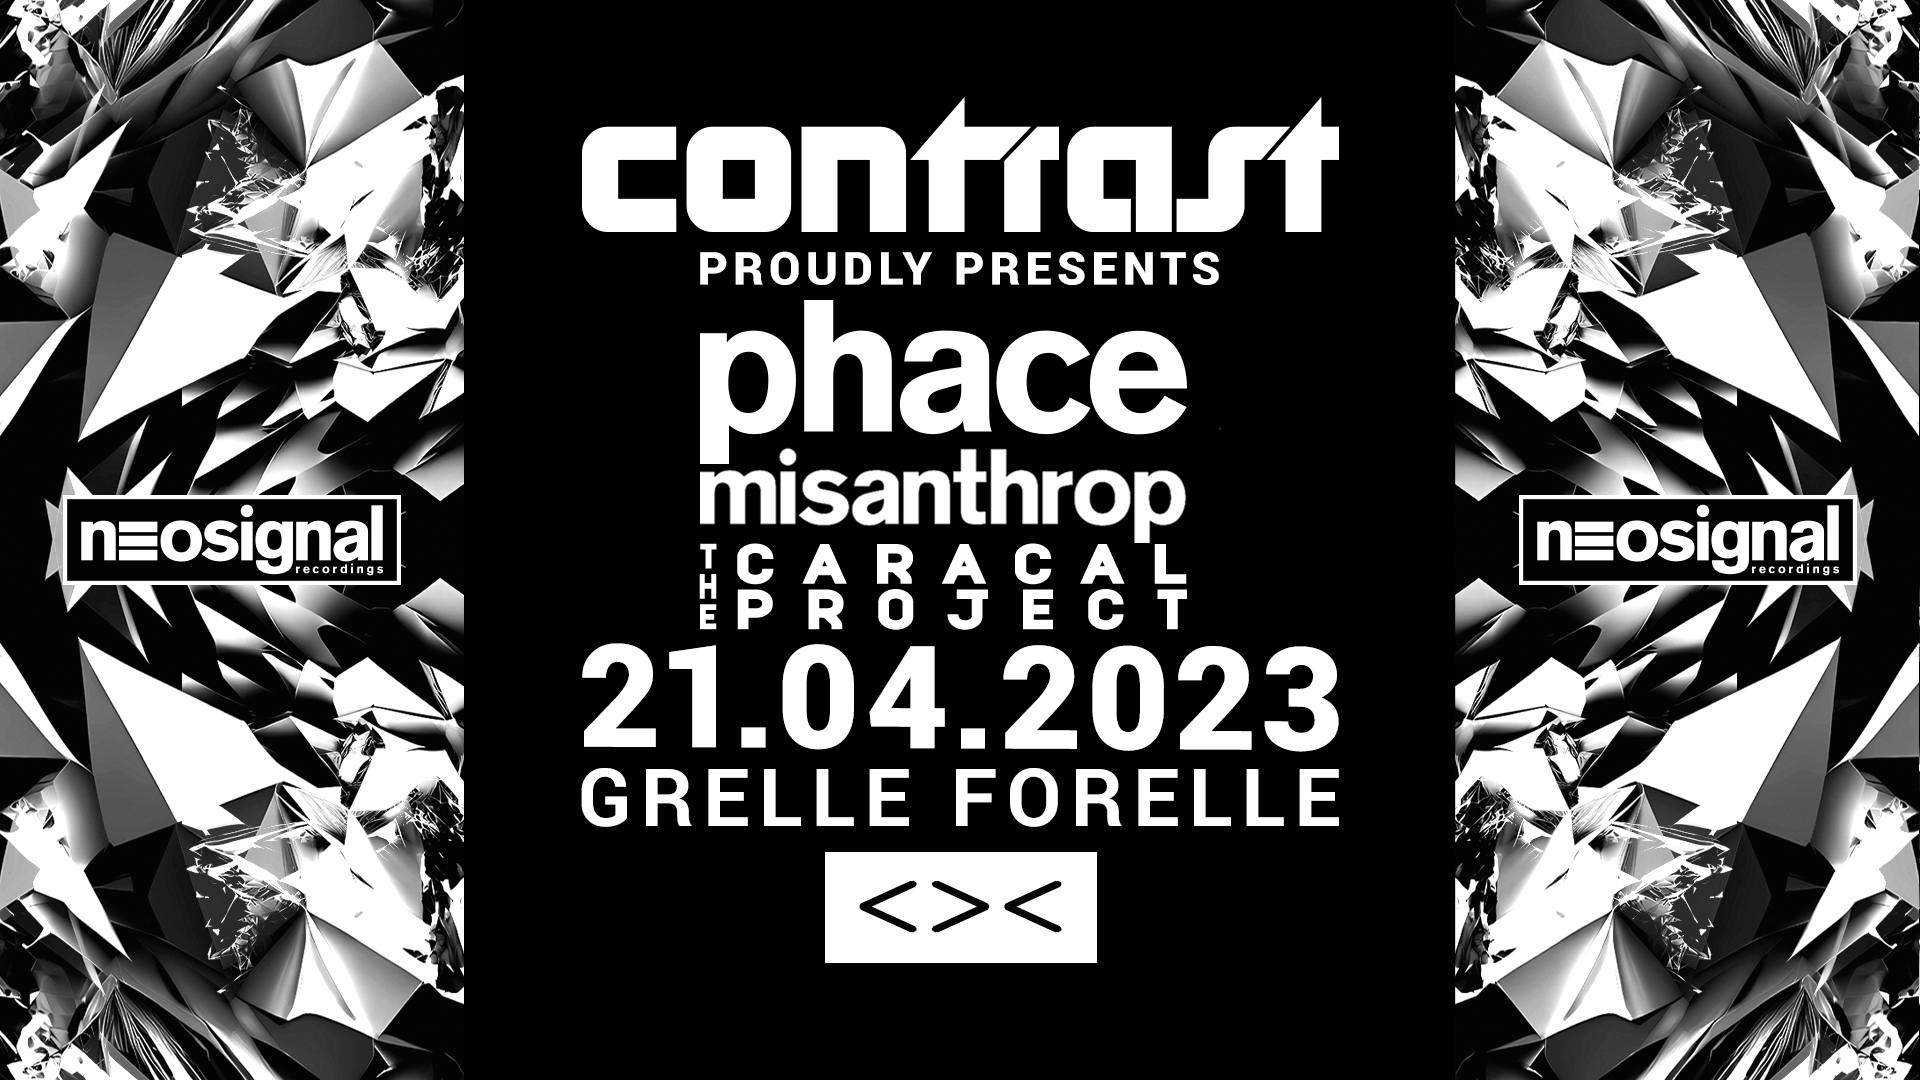 CONTRAST pres. NEOSIGNAL with Phace + Misanthrop + THE CARACAL PROJECT - 18 - フライヤー表